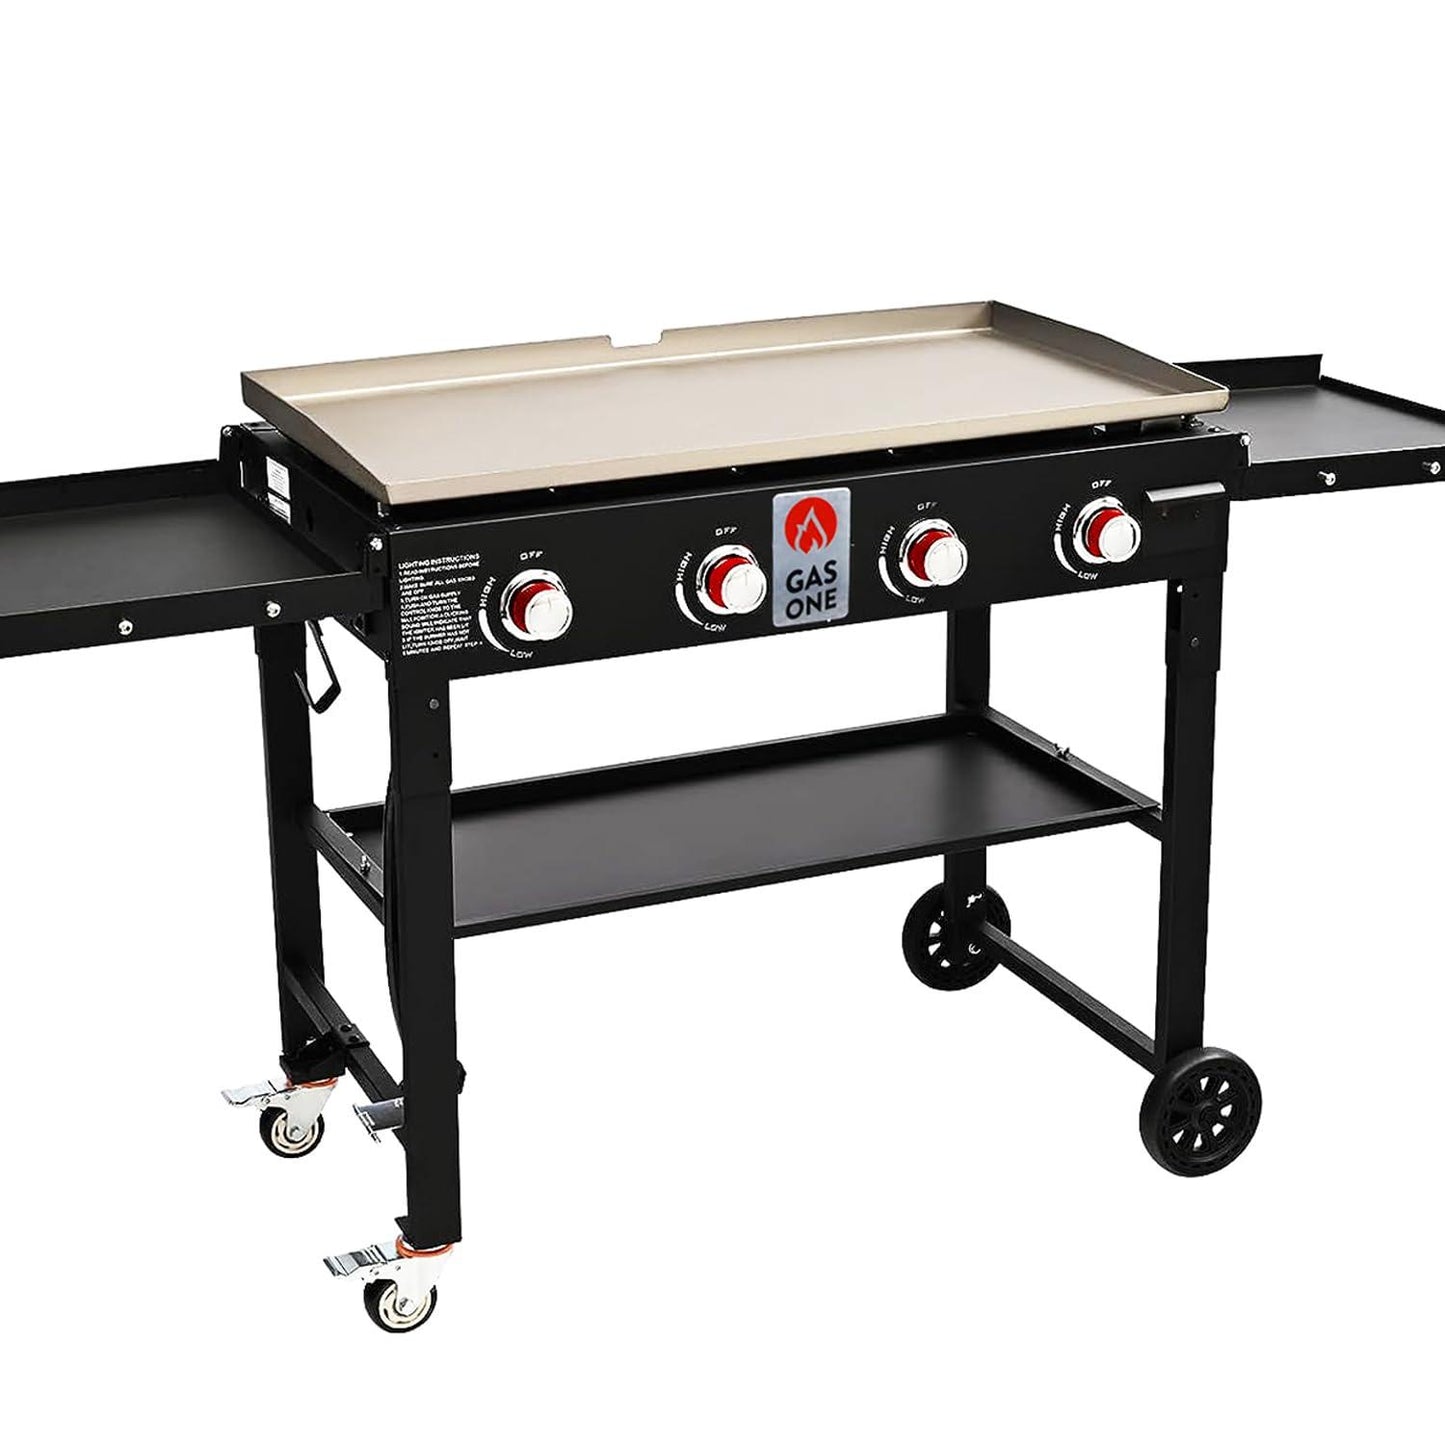 Gas One Propane Burner Grill–36-Inch Flat Top Grill Griddle Cooking Station–Foldable 4 Burner Propane Grill with Pre-Seasoned Griddle–Professional Burners for Outdoor Cooking with Side Shelves, Black - CookCave